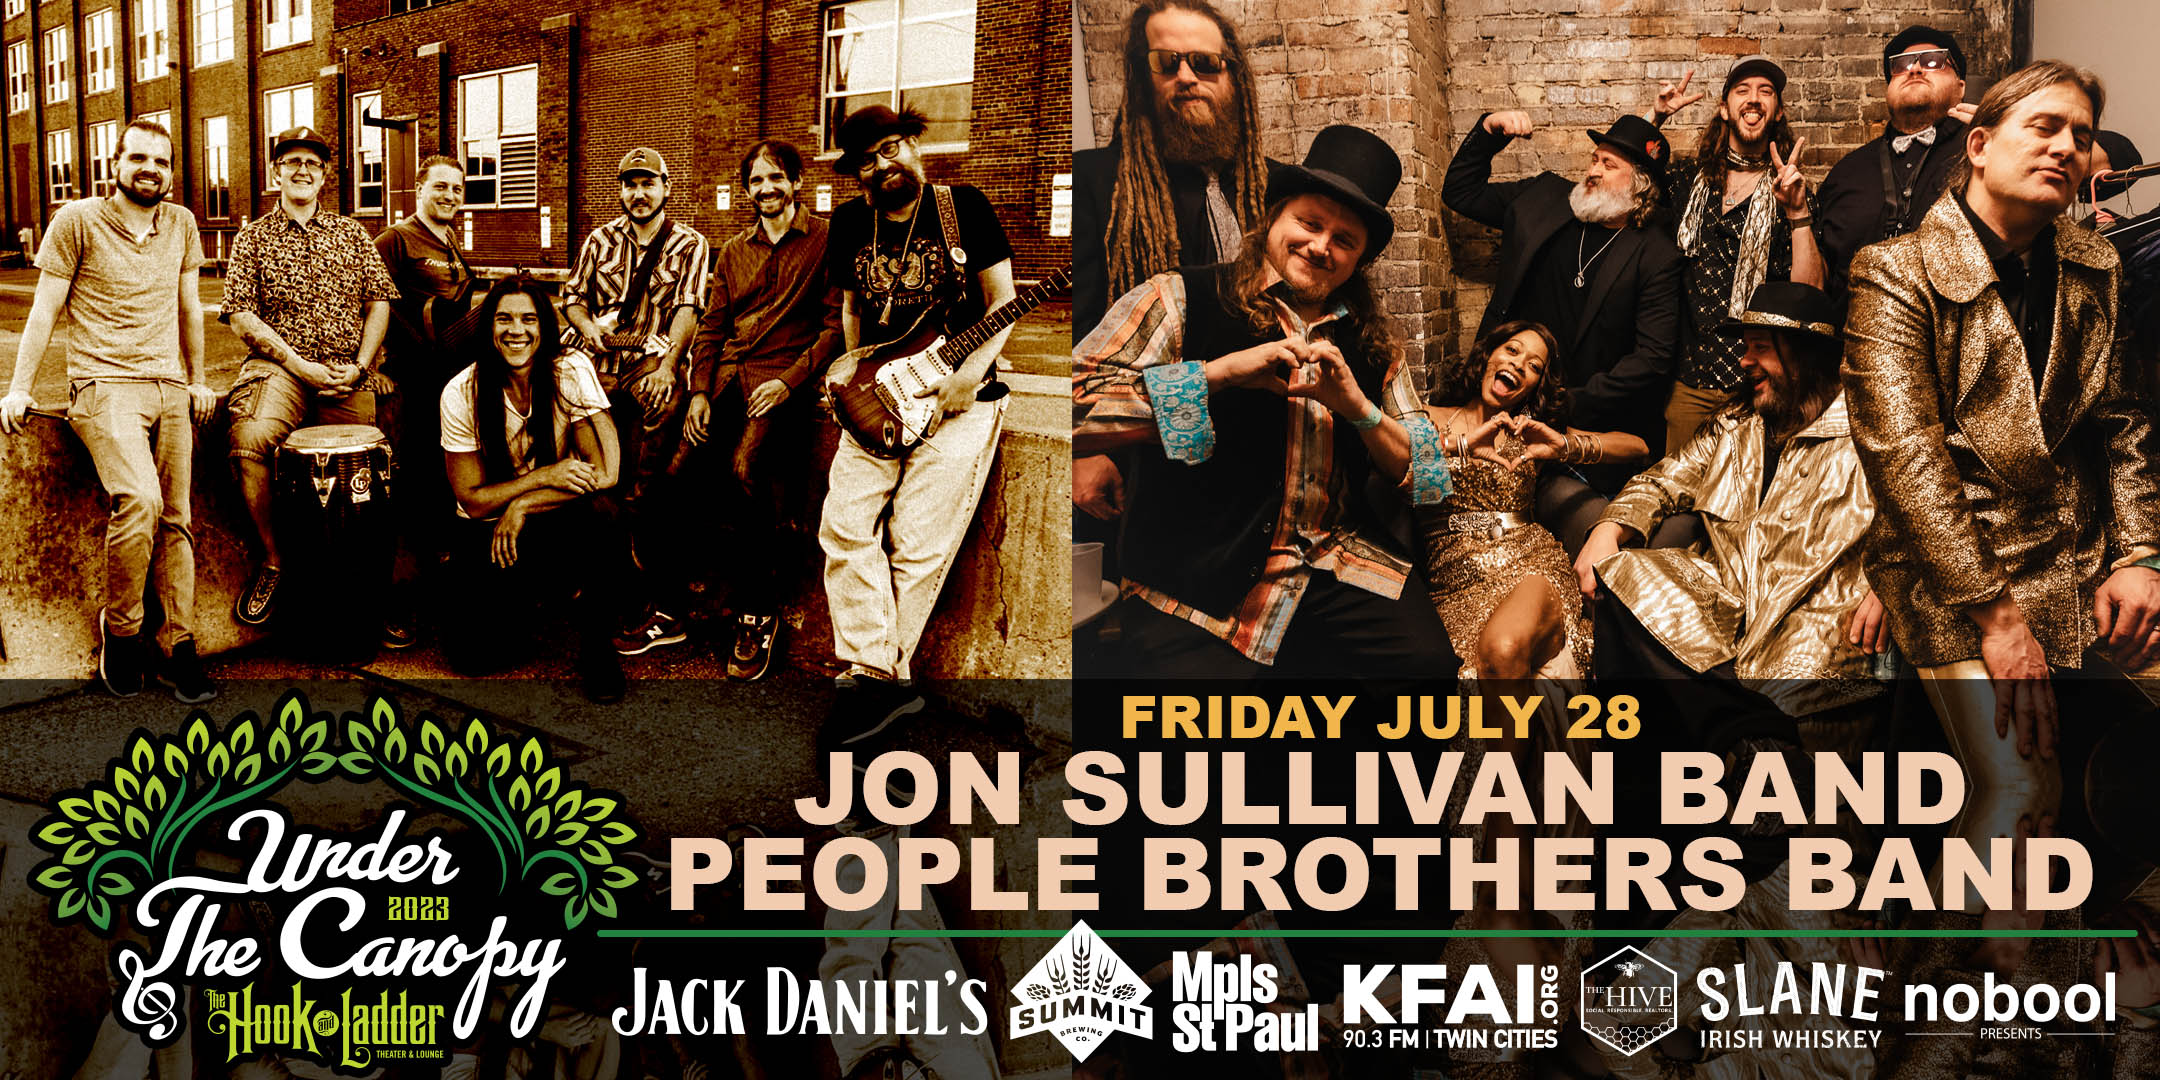 Jon Sullivan Band / People Brothers Band - Friday, July 28 Under The Canopy at The Hook and Ladder Theater